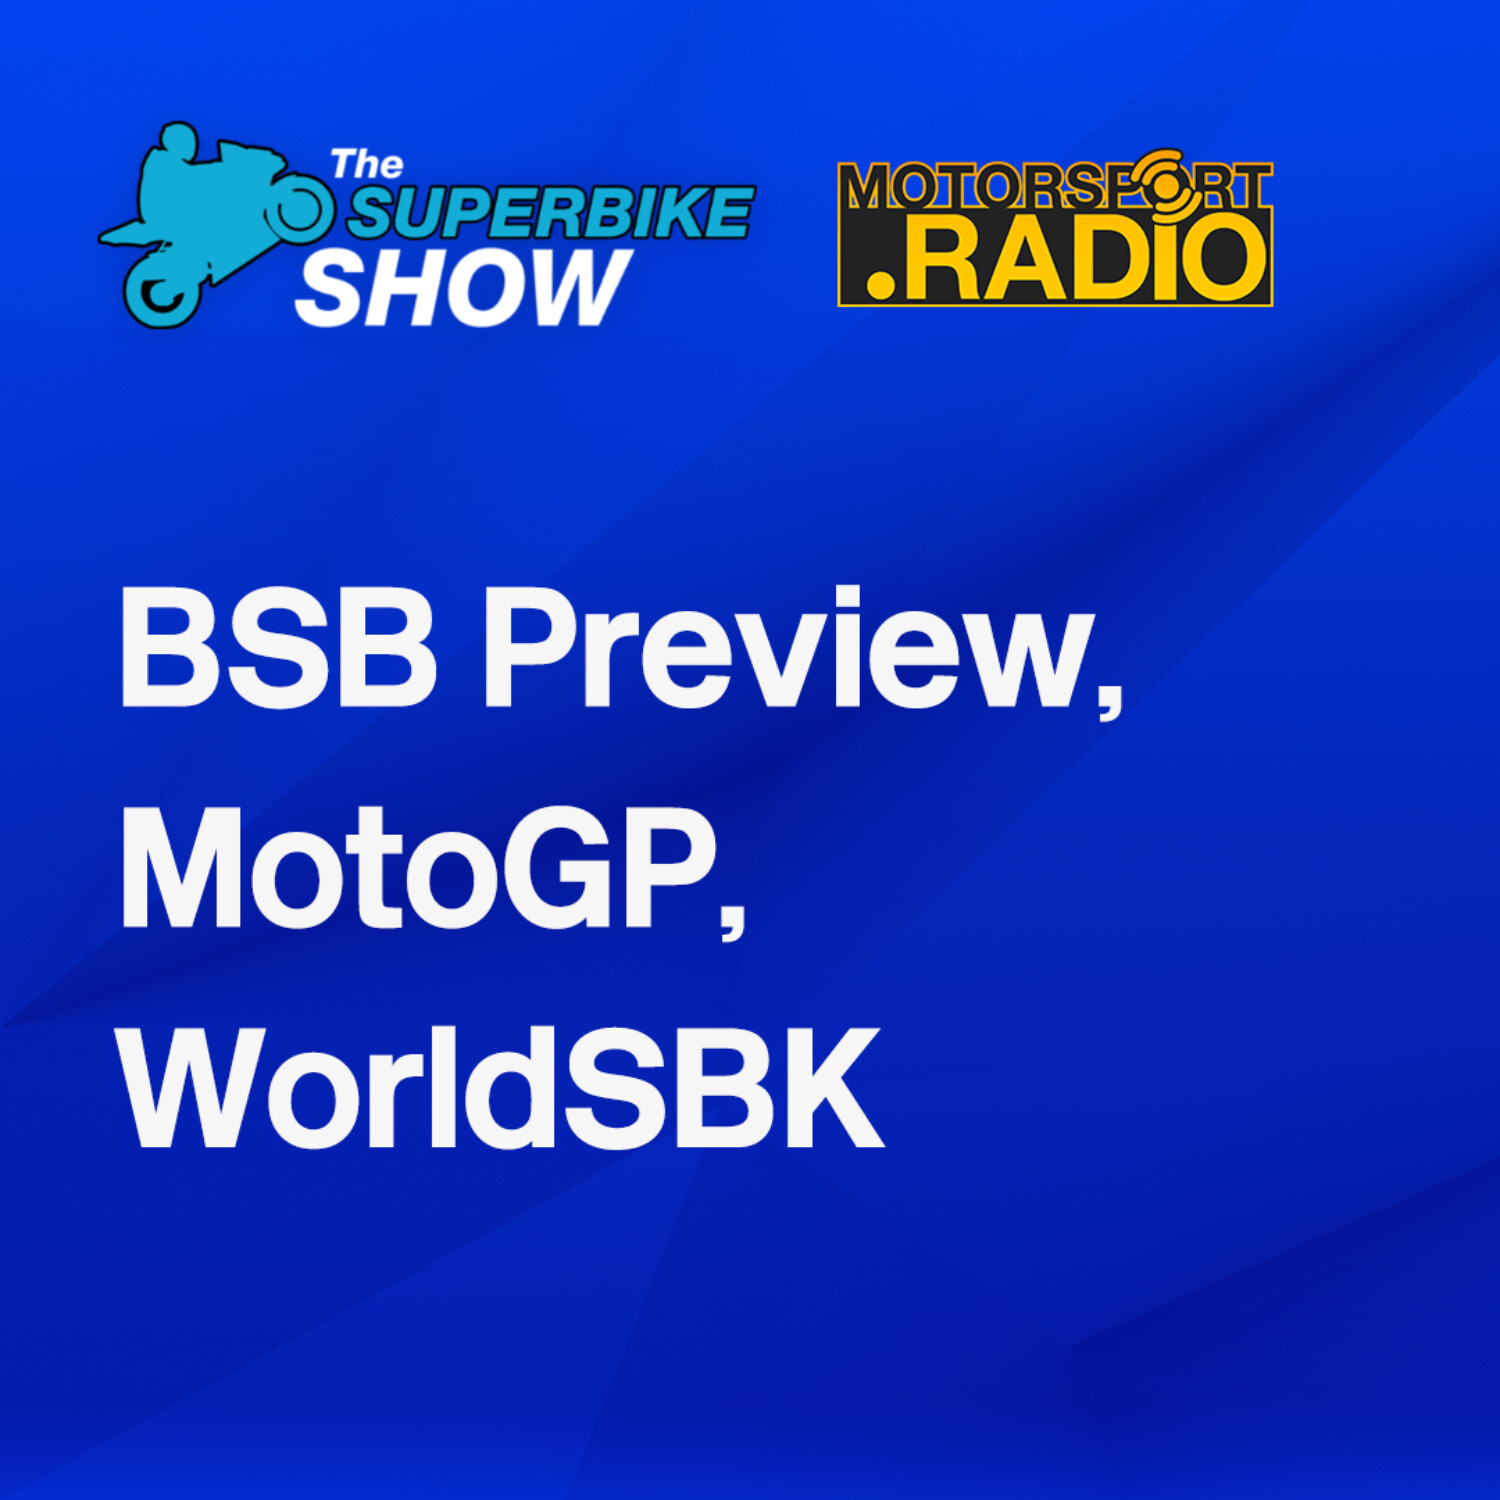 #BSB #Silverstone preview, #MotoGP #AmericasGP and #WorldSBK Review